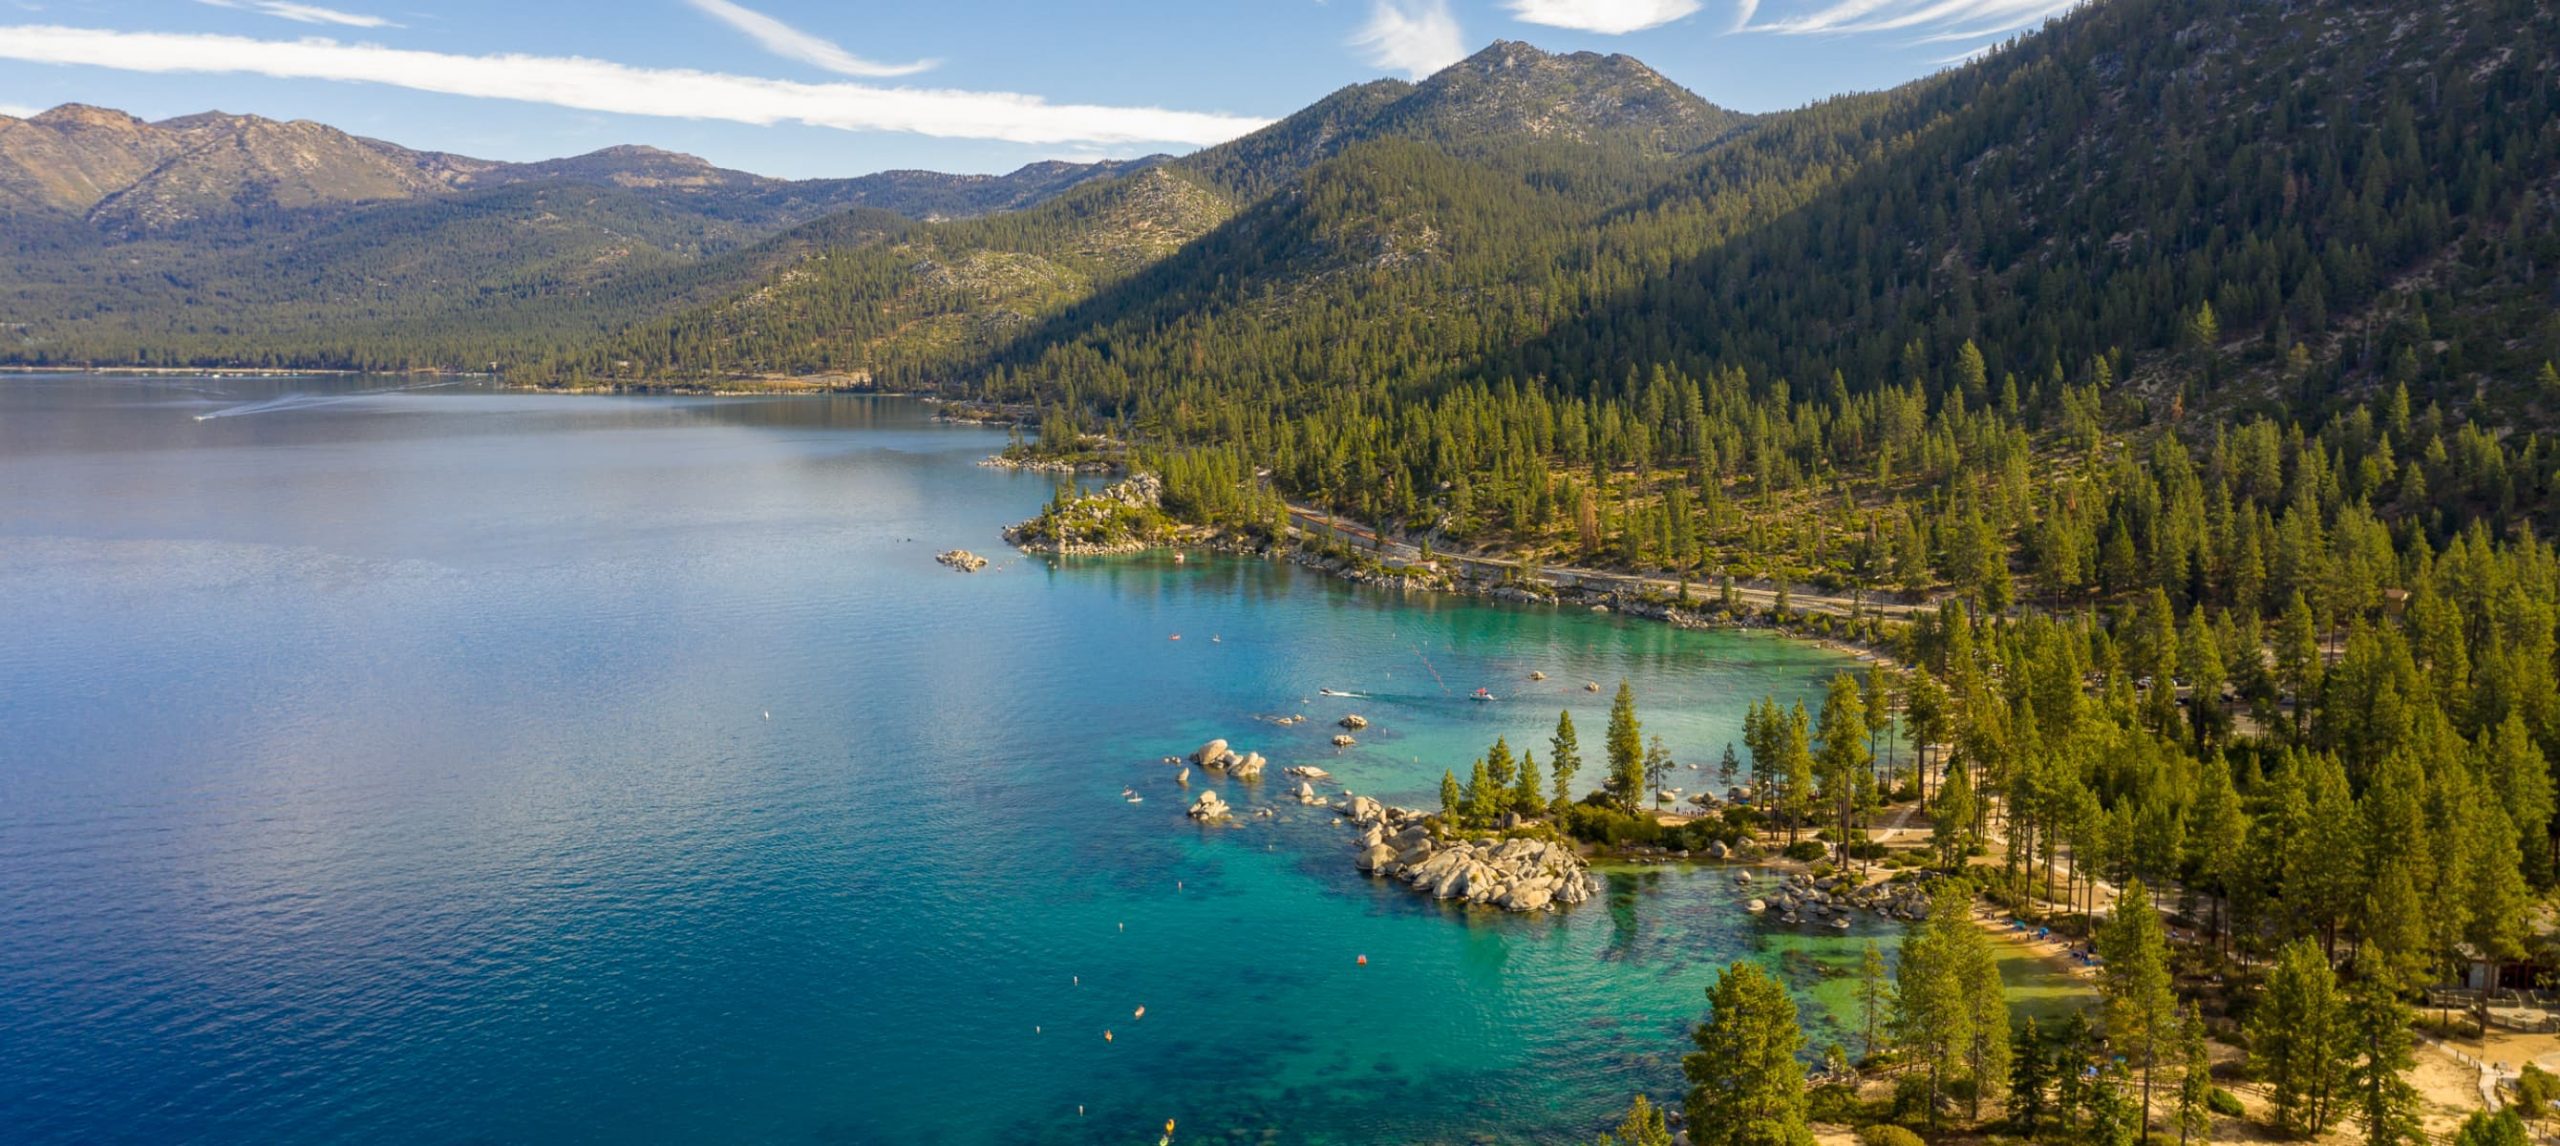 The 13 Best Lake Vacations in the U.S. CuddlyNest Travel Blog